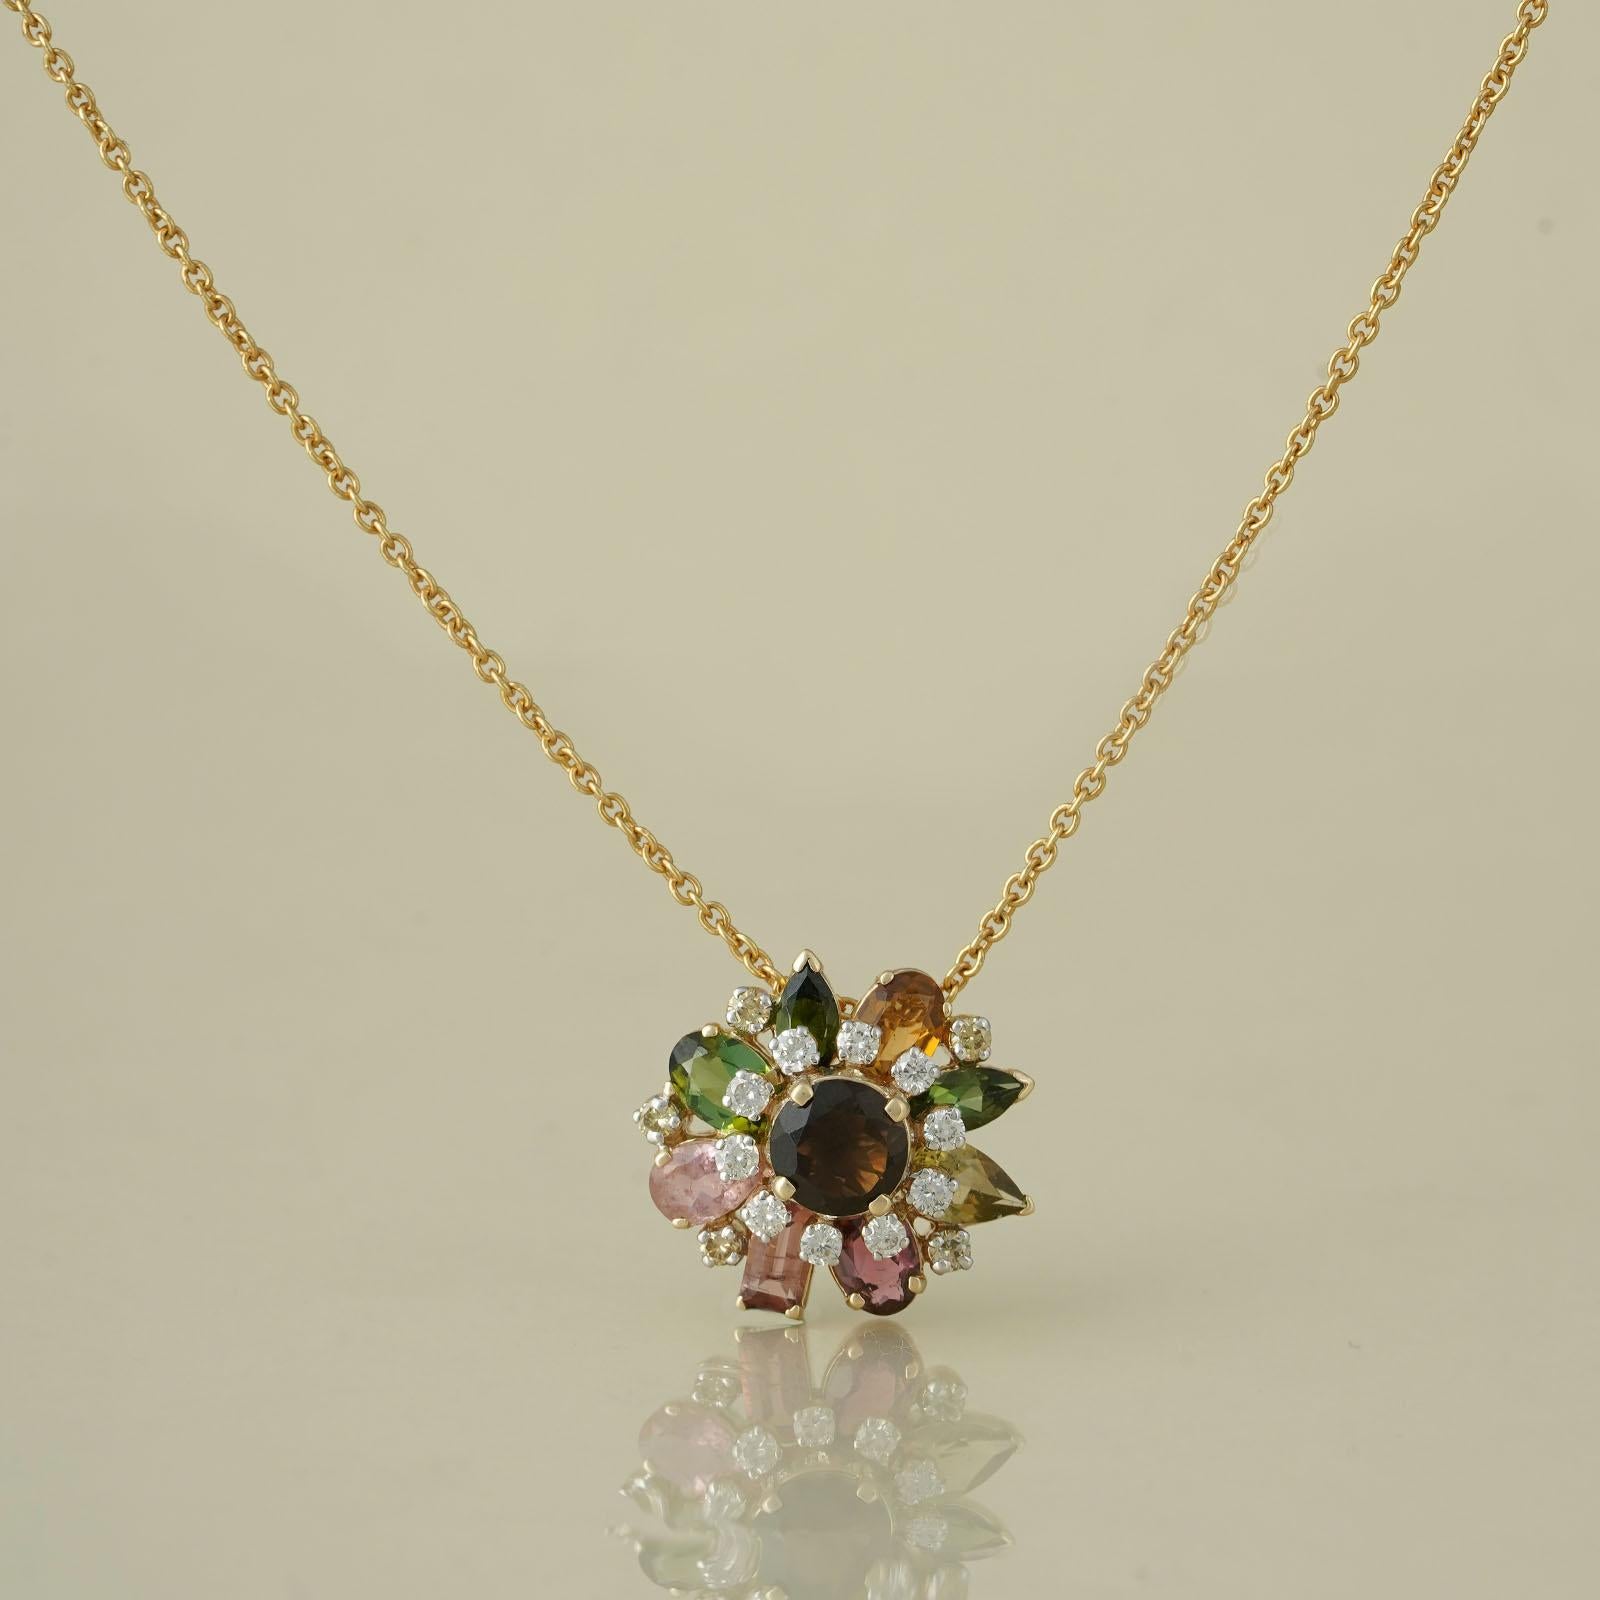 Moi Autumn Gold Diamond and Gemstones Pendant Necklace In New Condition For Sale In Lawrenceville, GA